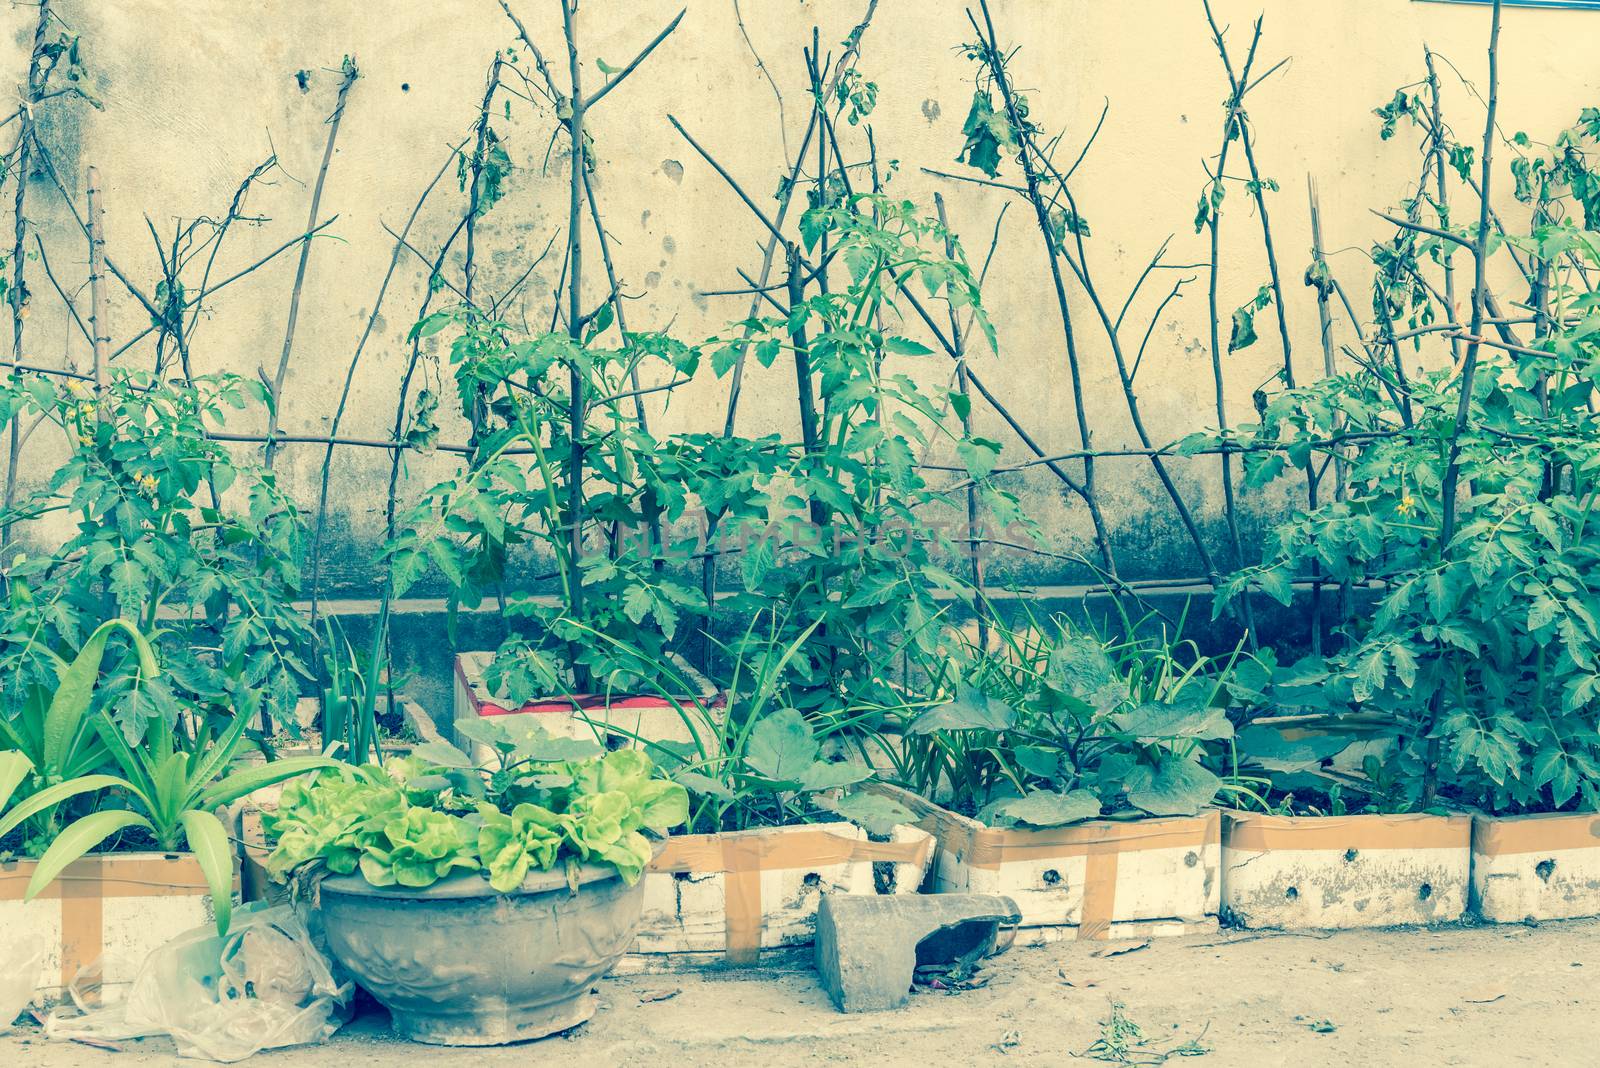 Styrofoam boxes and pots from urban vertical garden in Hanoi, Vietnam. Kitchen vegetable and herbs growing on homemade tree branches trellis structure, self sufficient concept in Asia